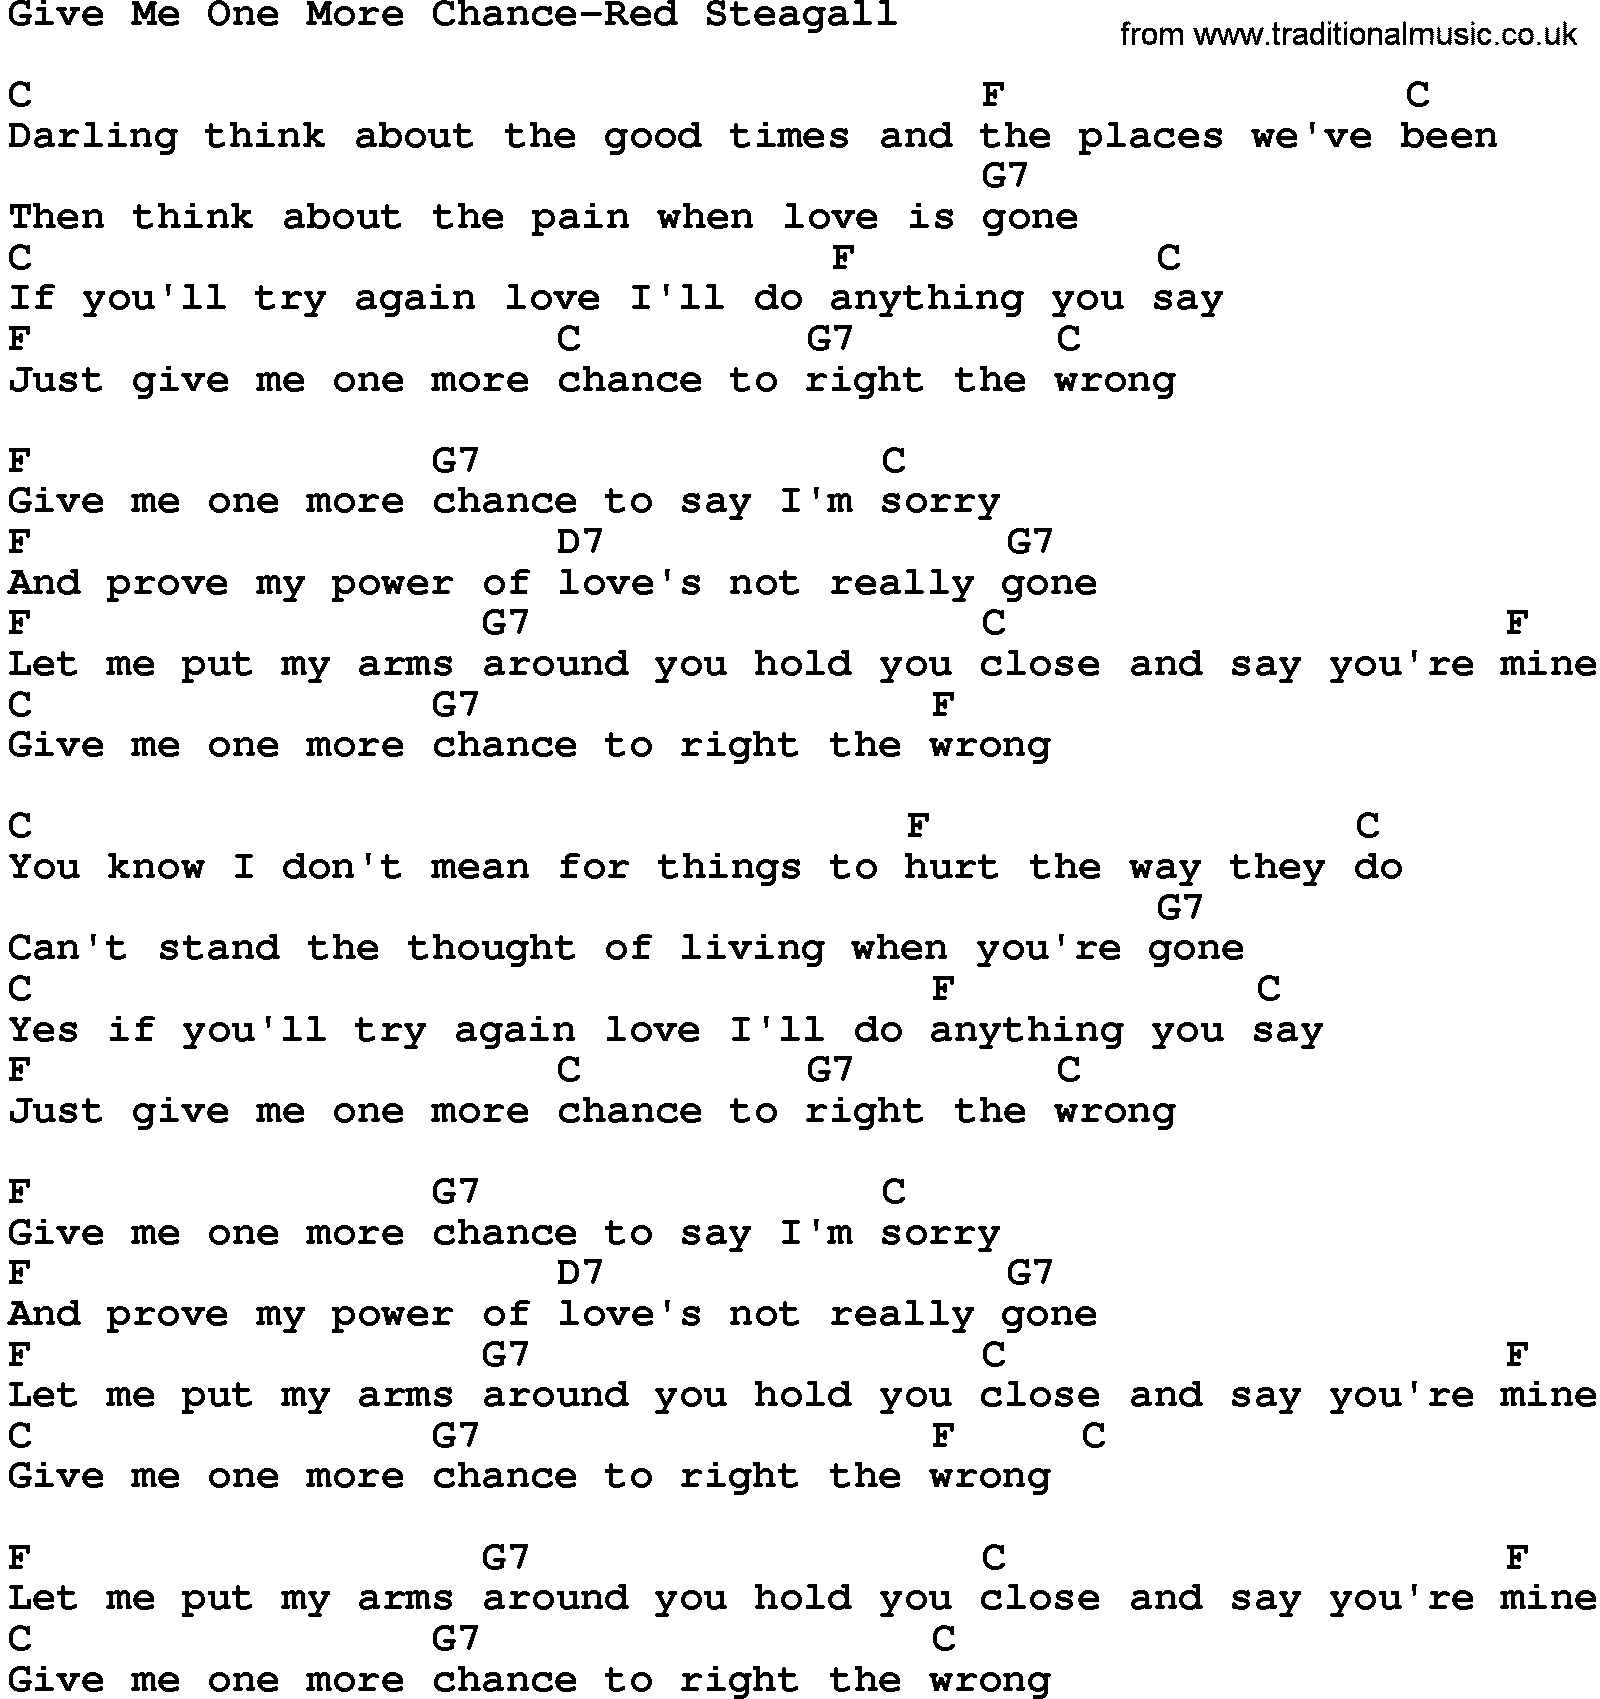 Country music song: Give Me One More Chance-Red Steagall lyrics and chords